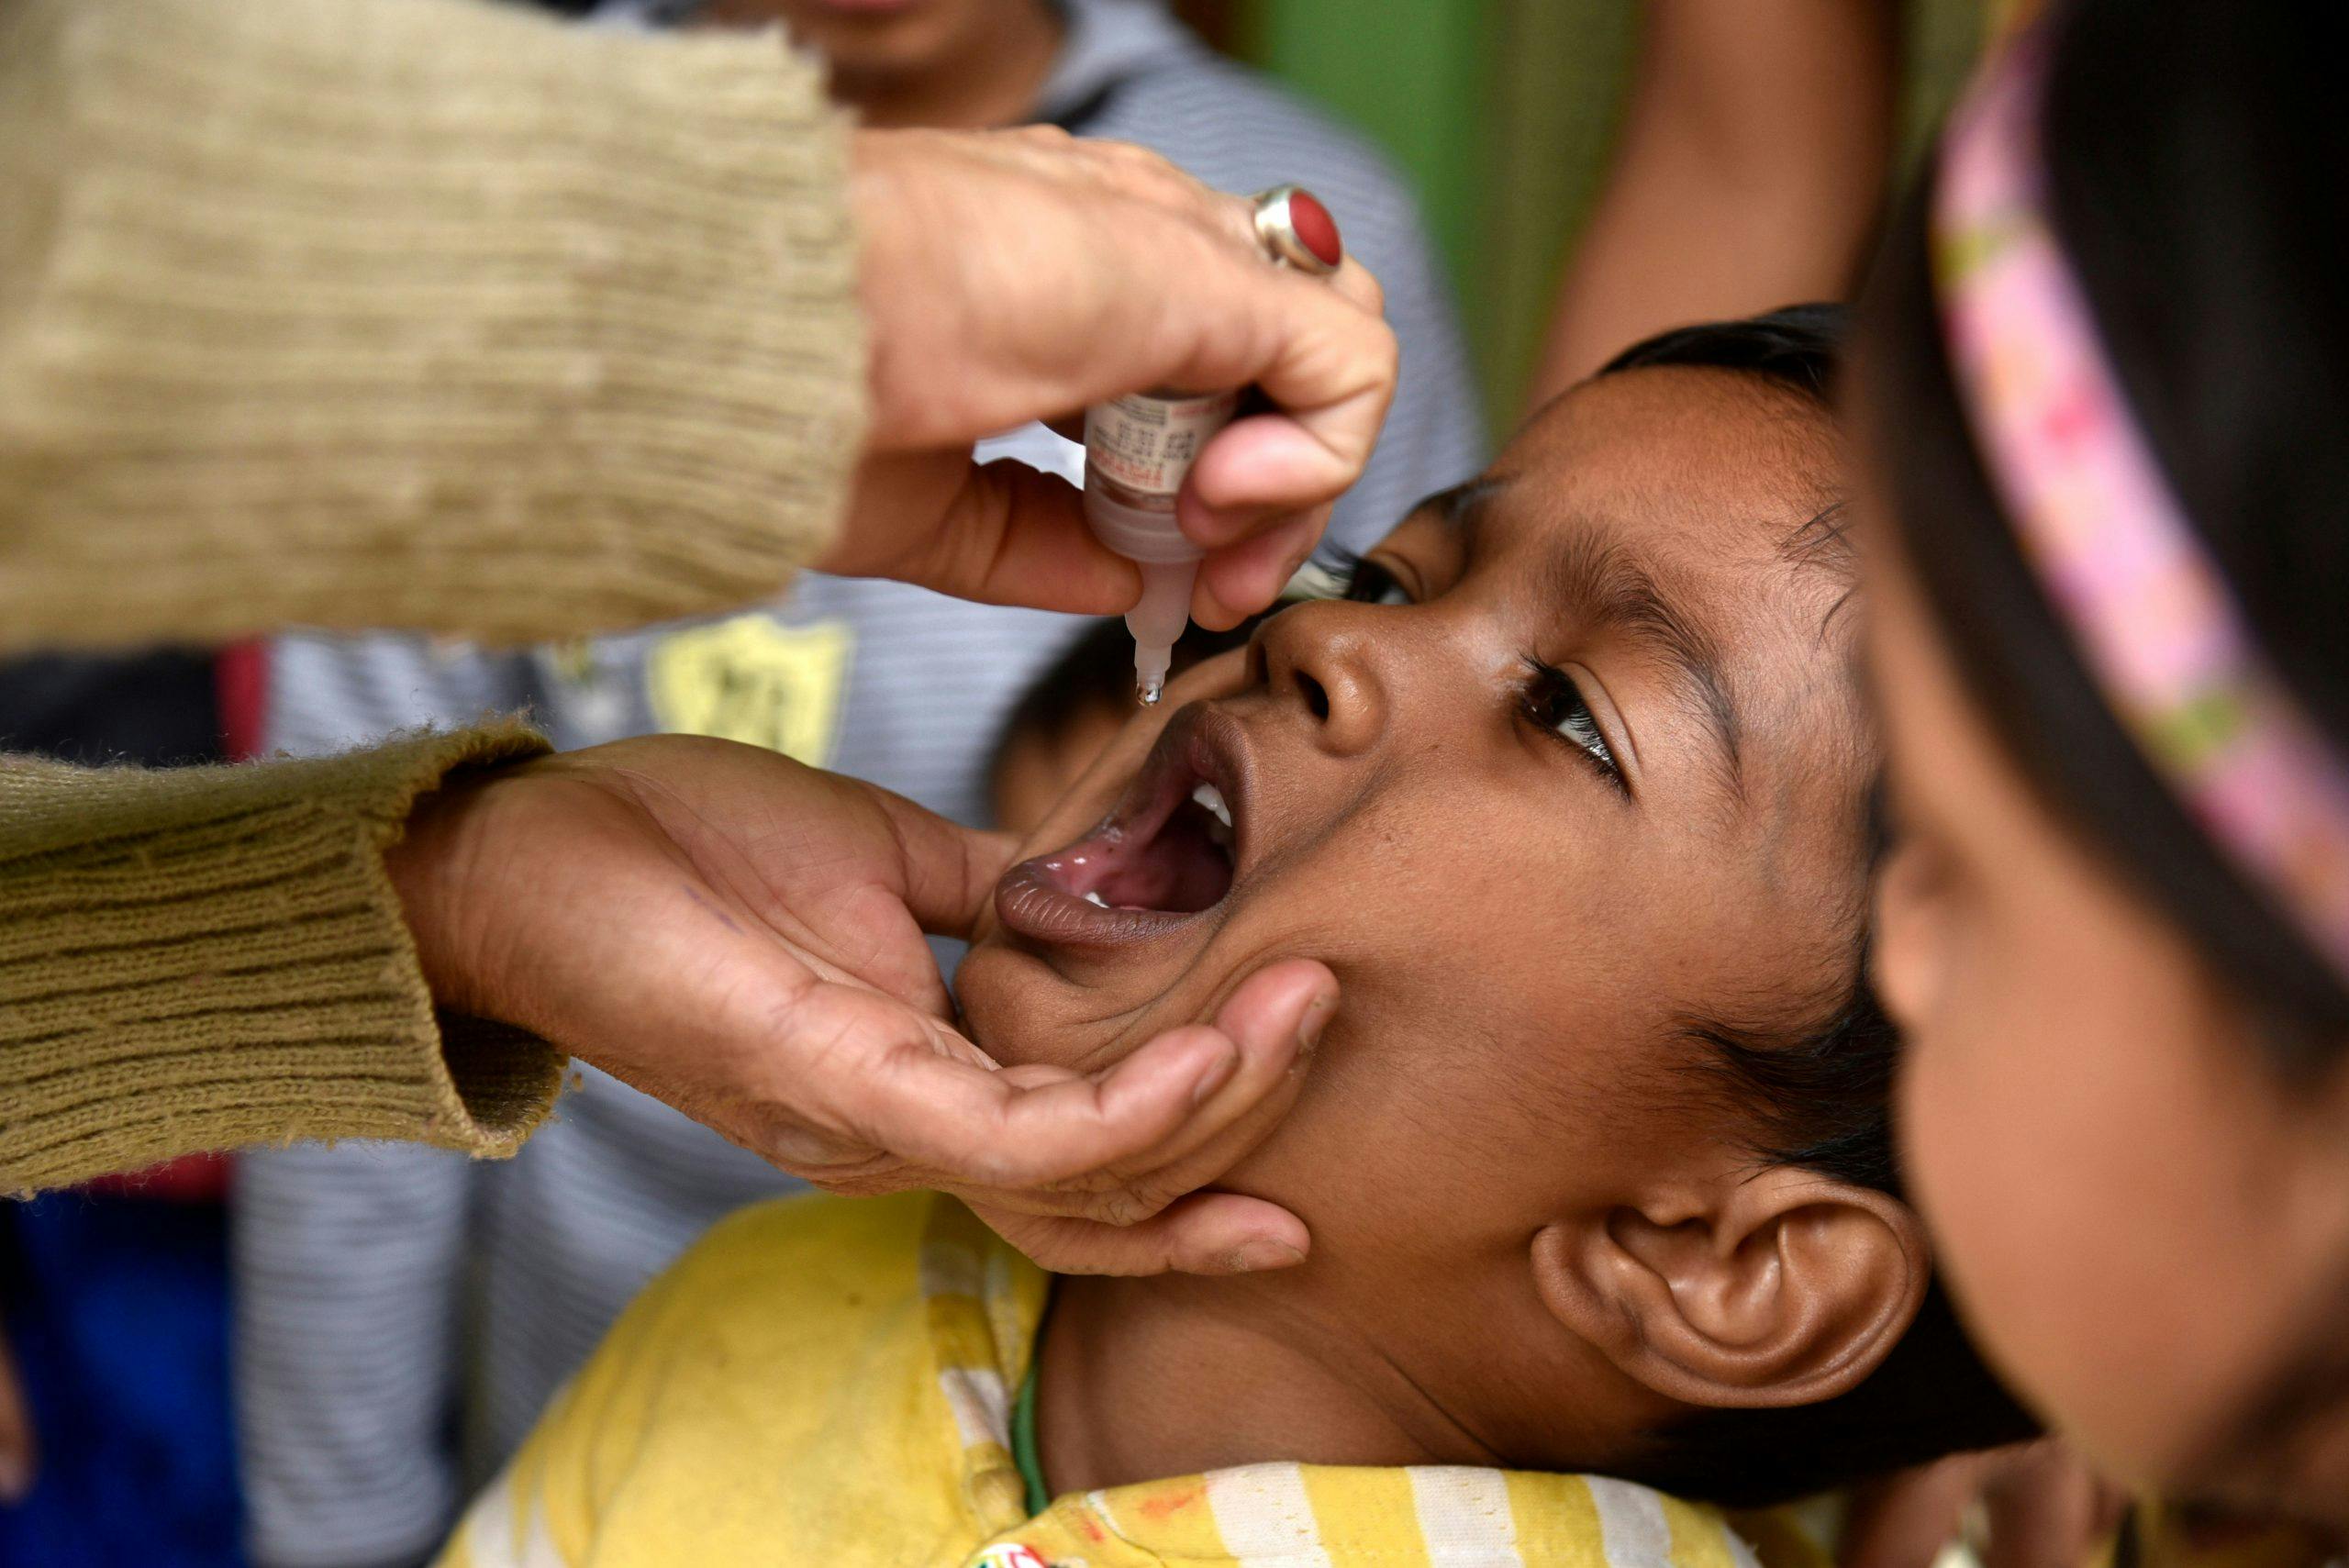 An Indian child tilts their head up as an adult's hand squeezes a liquid vaccine into the child's mouth.